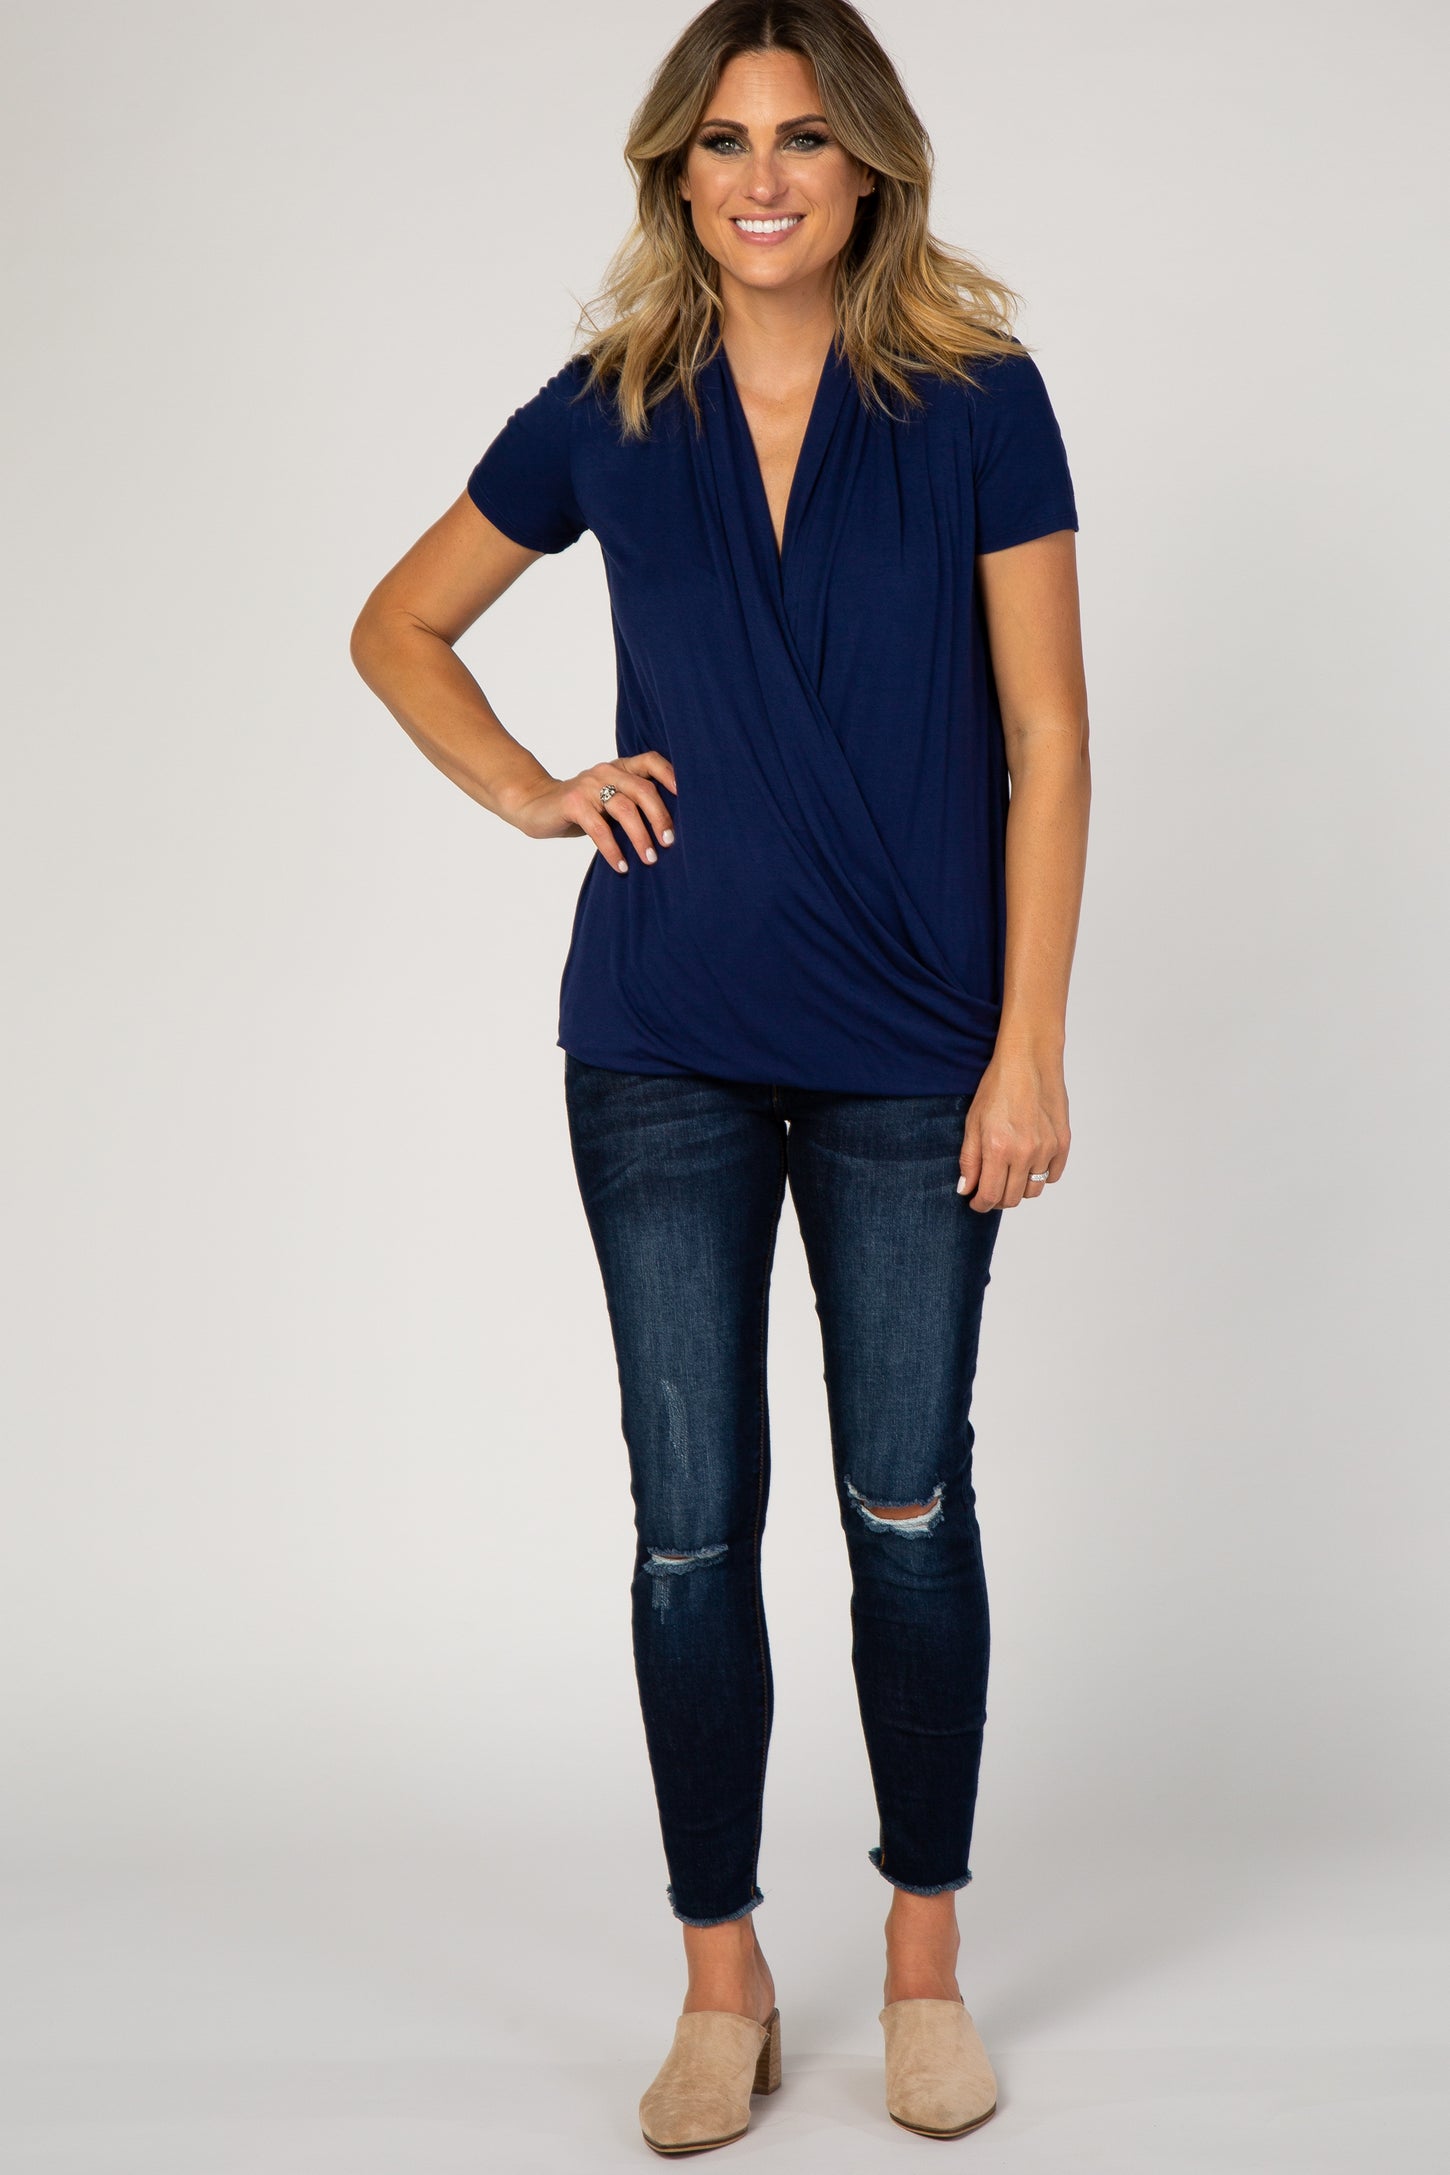 PinkBlush Navy Pleated Wrap Accent Nursing Top